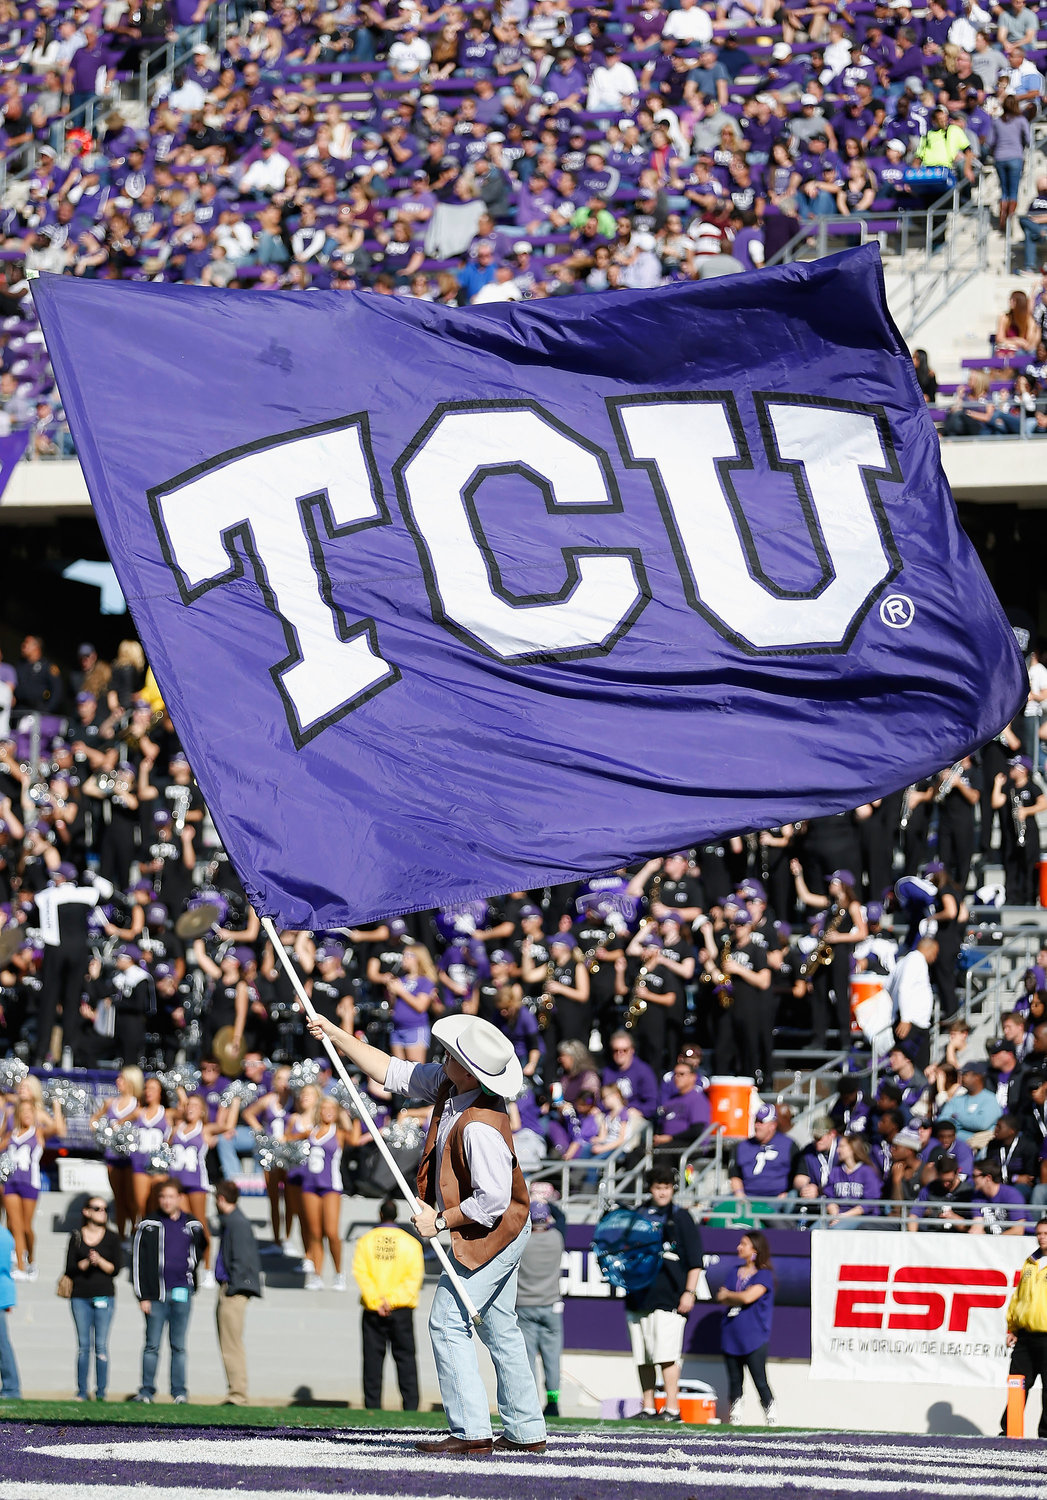 TCU stuns Baylor, winning the first game since Gary Patterson stepped